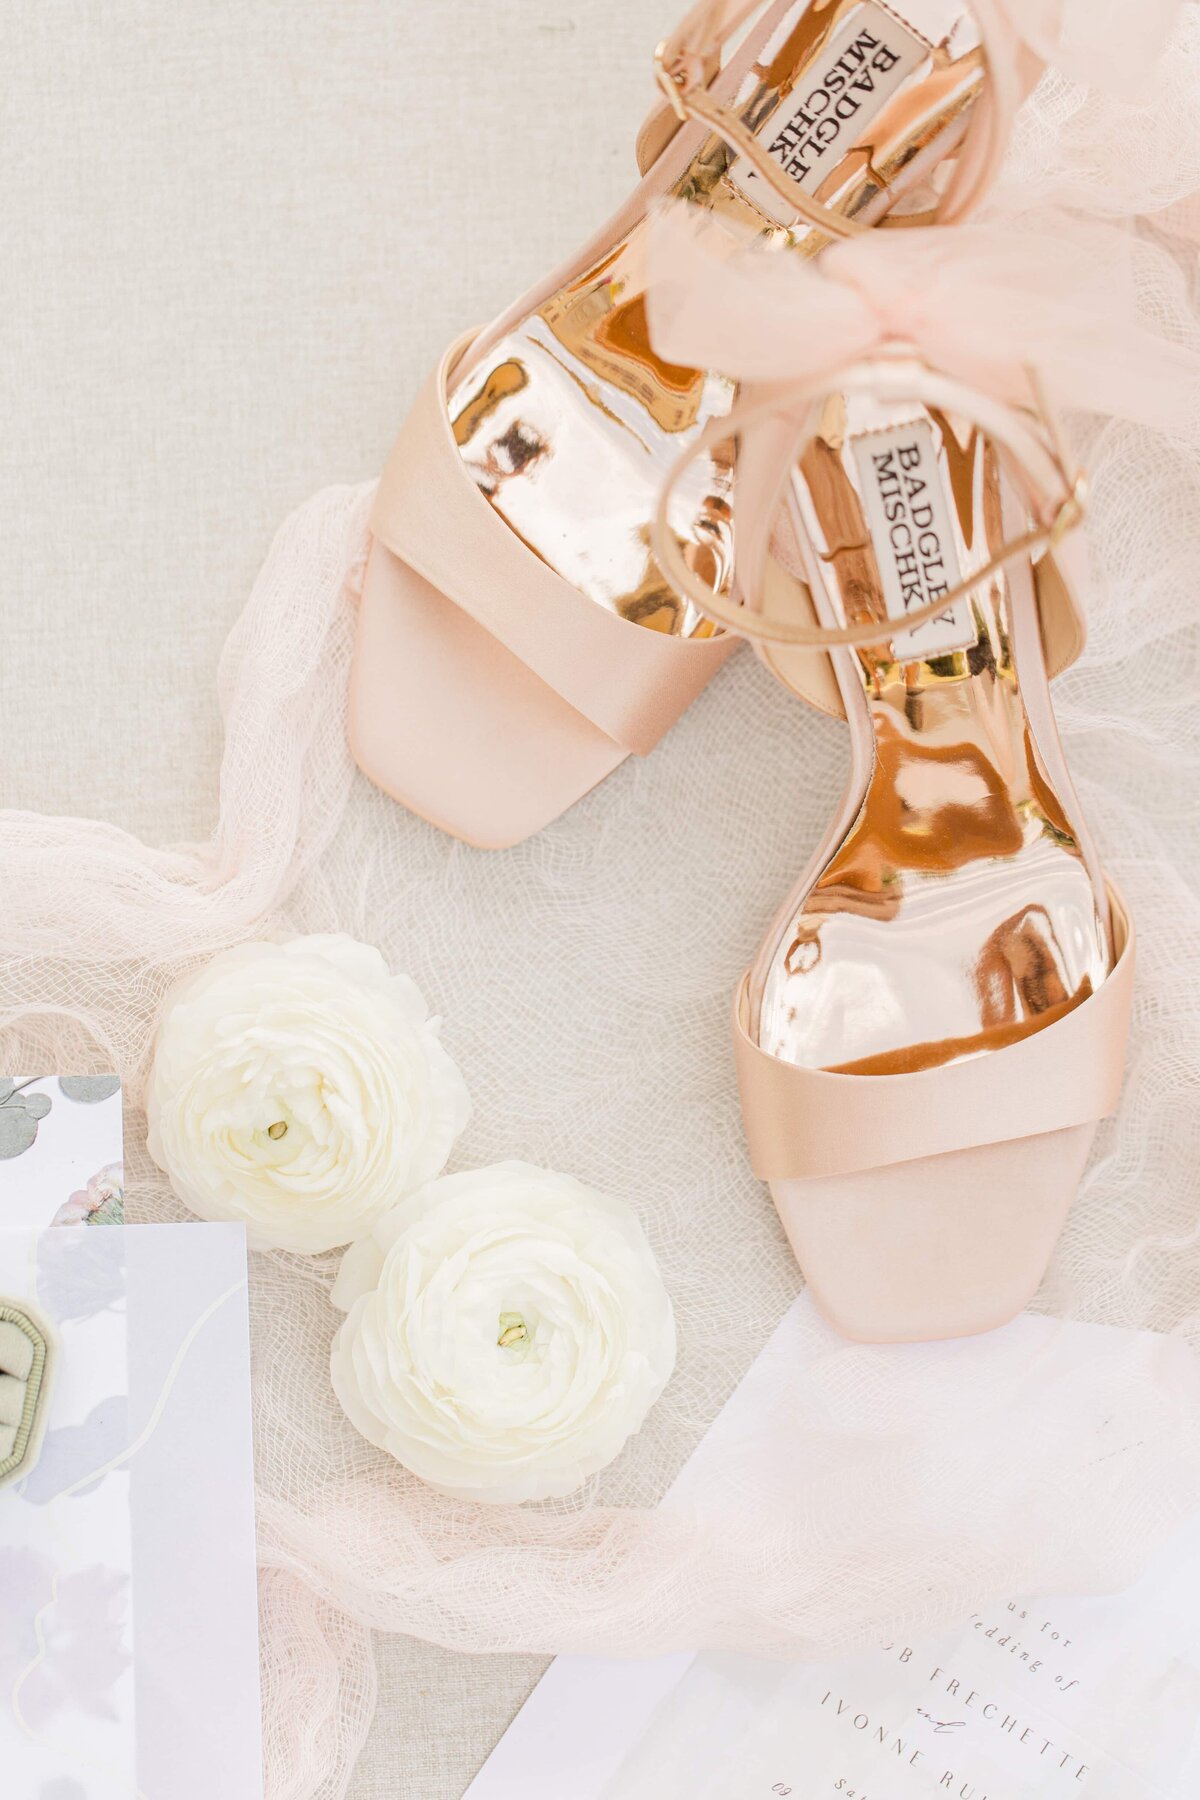 Elegant rose gold high-heeled shoes with ribbons, surrounded by white roses and wedding stationery on a light background, perfect for Park Farm Winery weddings.